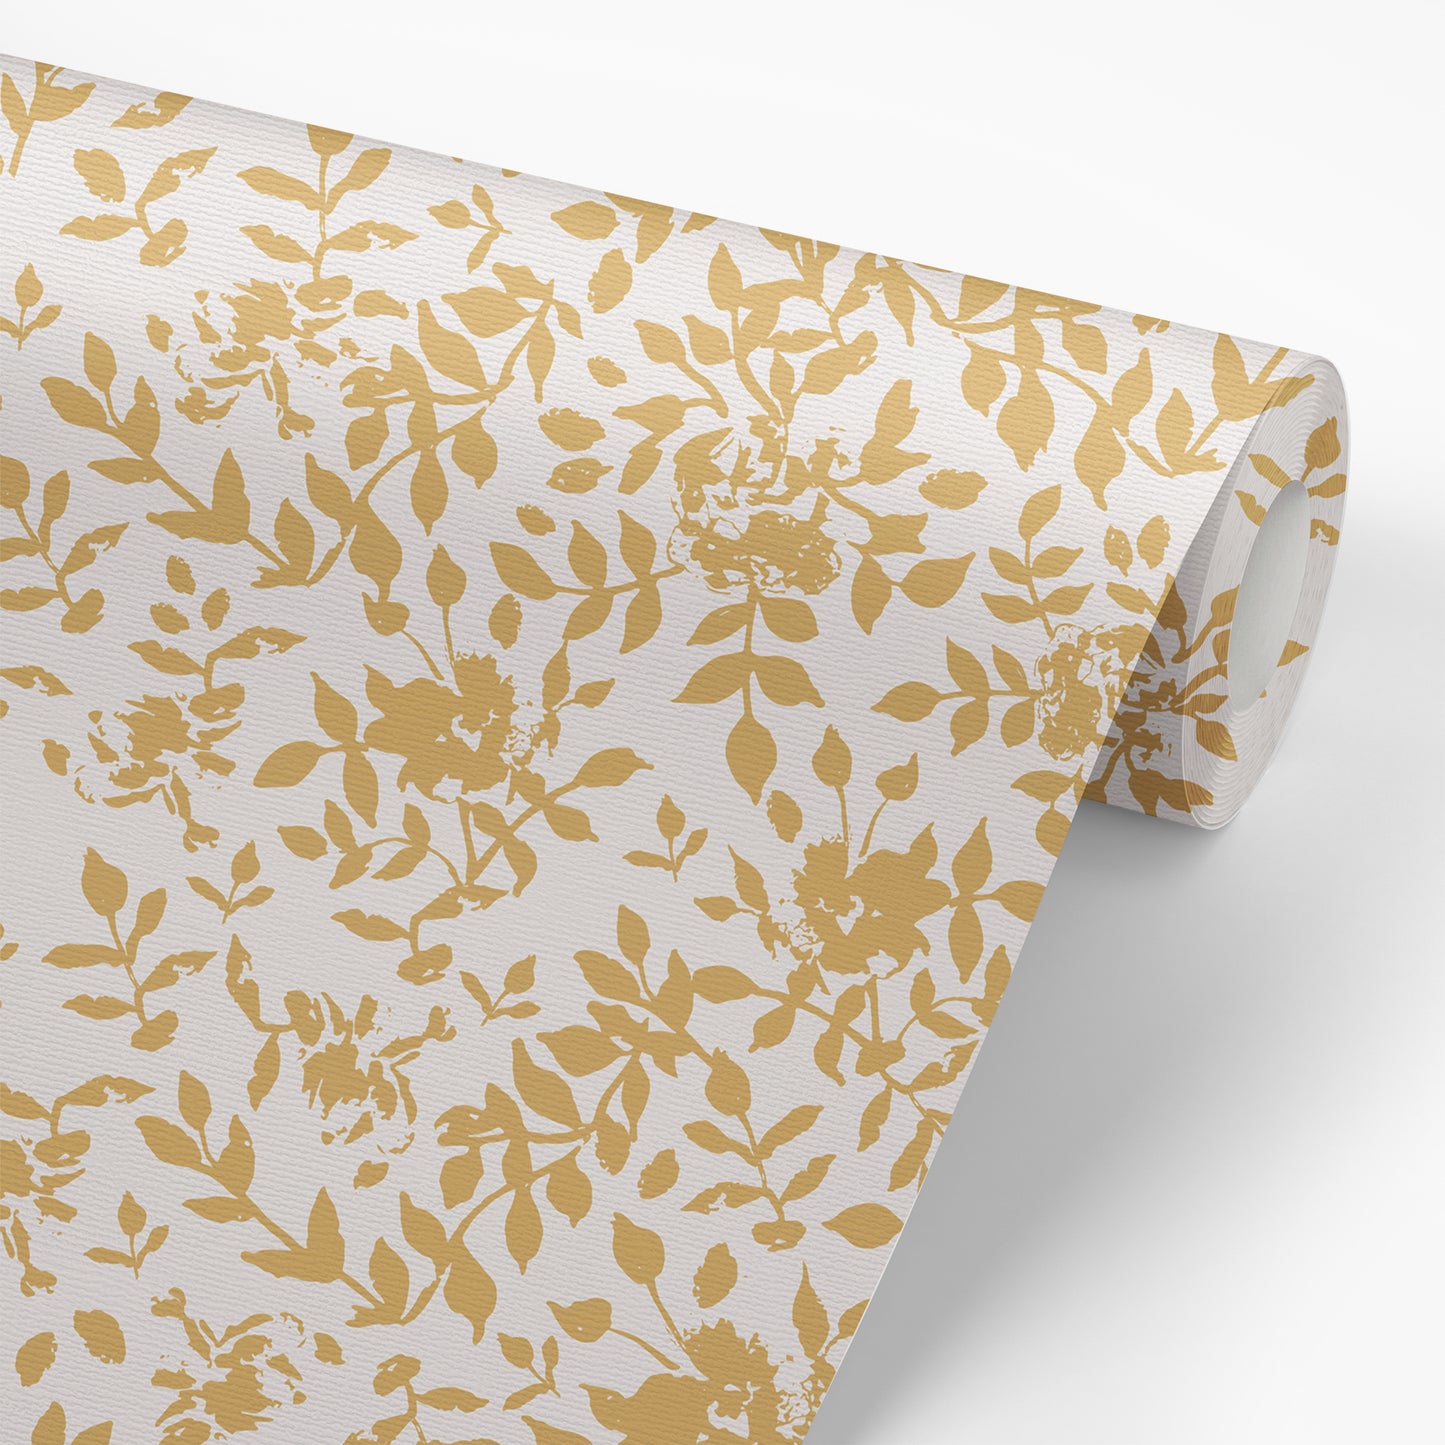 Wallpaper panel featuring the Florence Peel and Stick Wallpaper in Ochre yellow and white by Jackie O'Bosky. These floral silhouettes make a beautiful accent wall or statement wall!